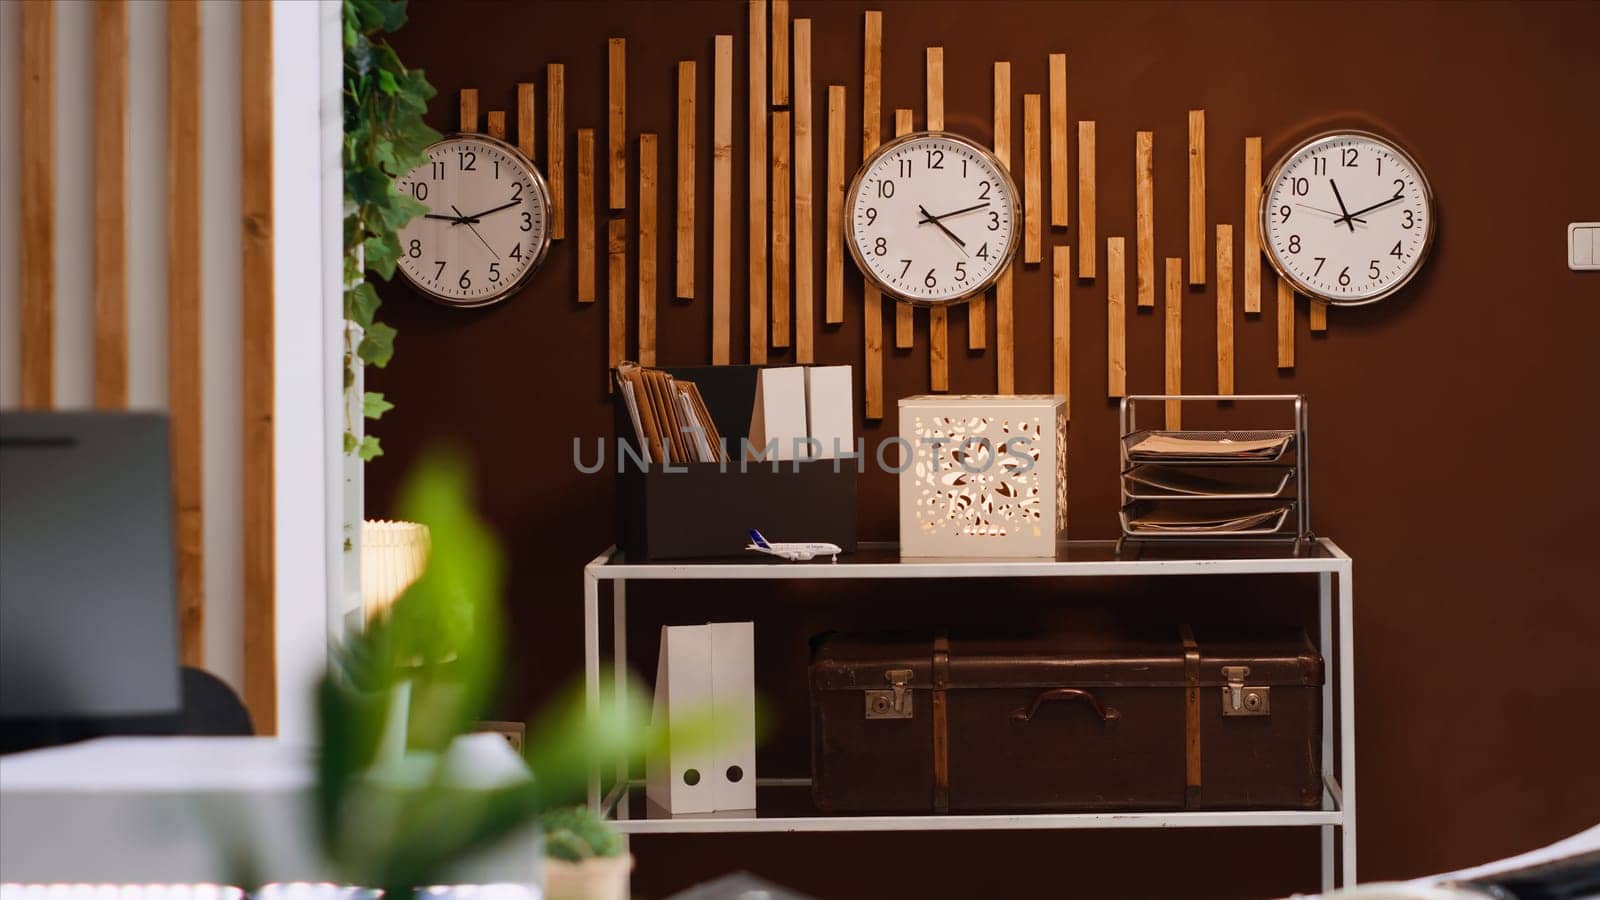 Empty front desk and lobby at luxurious vacation resort with clocks showing different international time zones. Modern reception and lounge area ready for guests and travelers, hospitality industry.